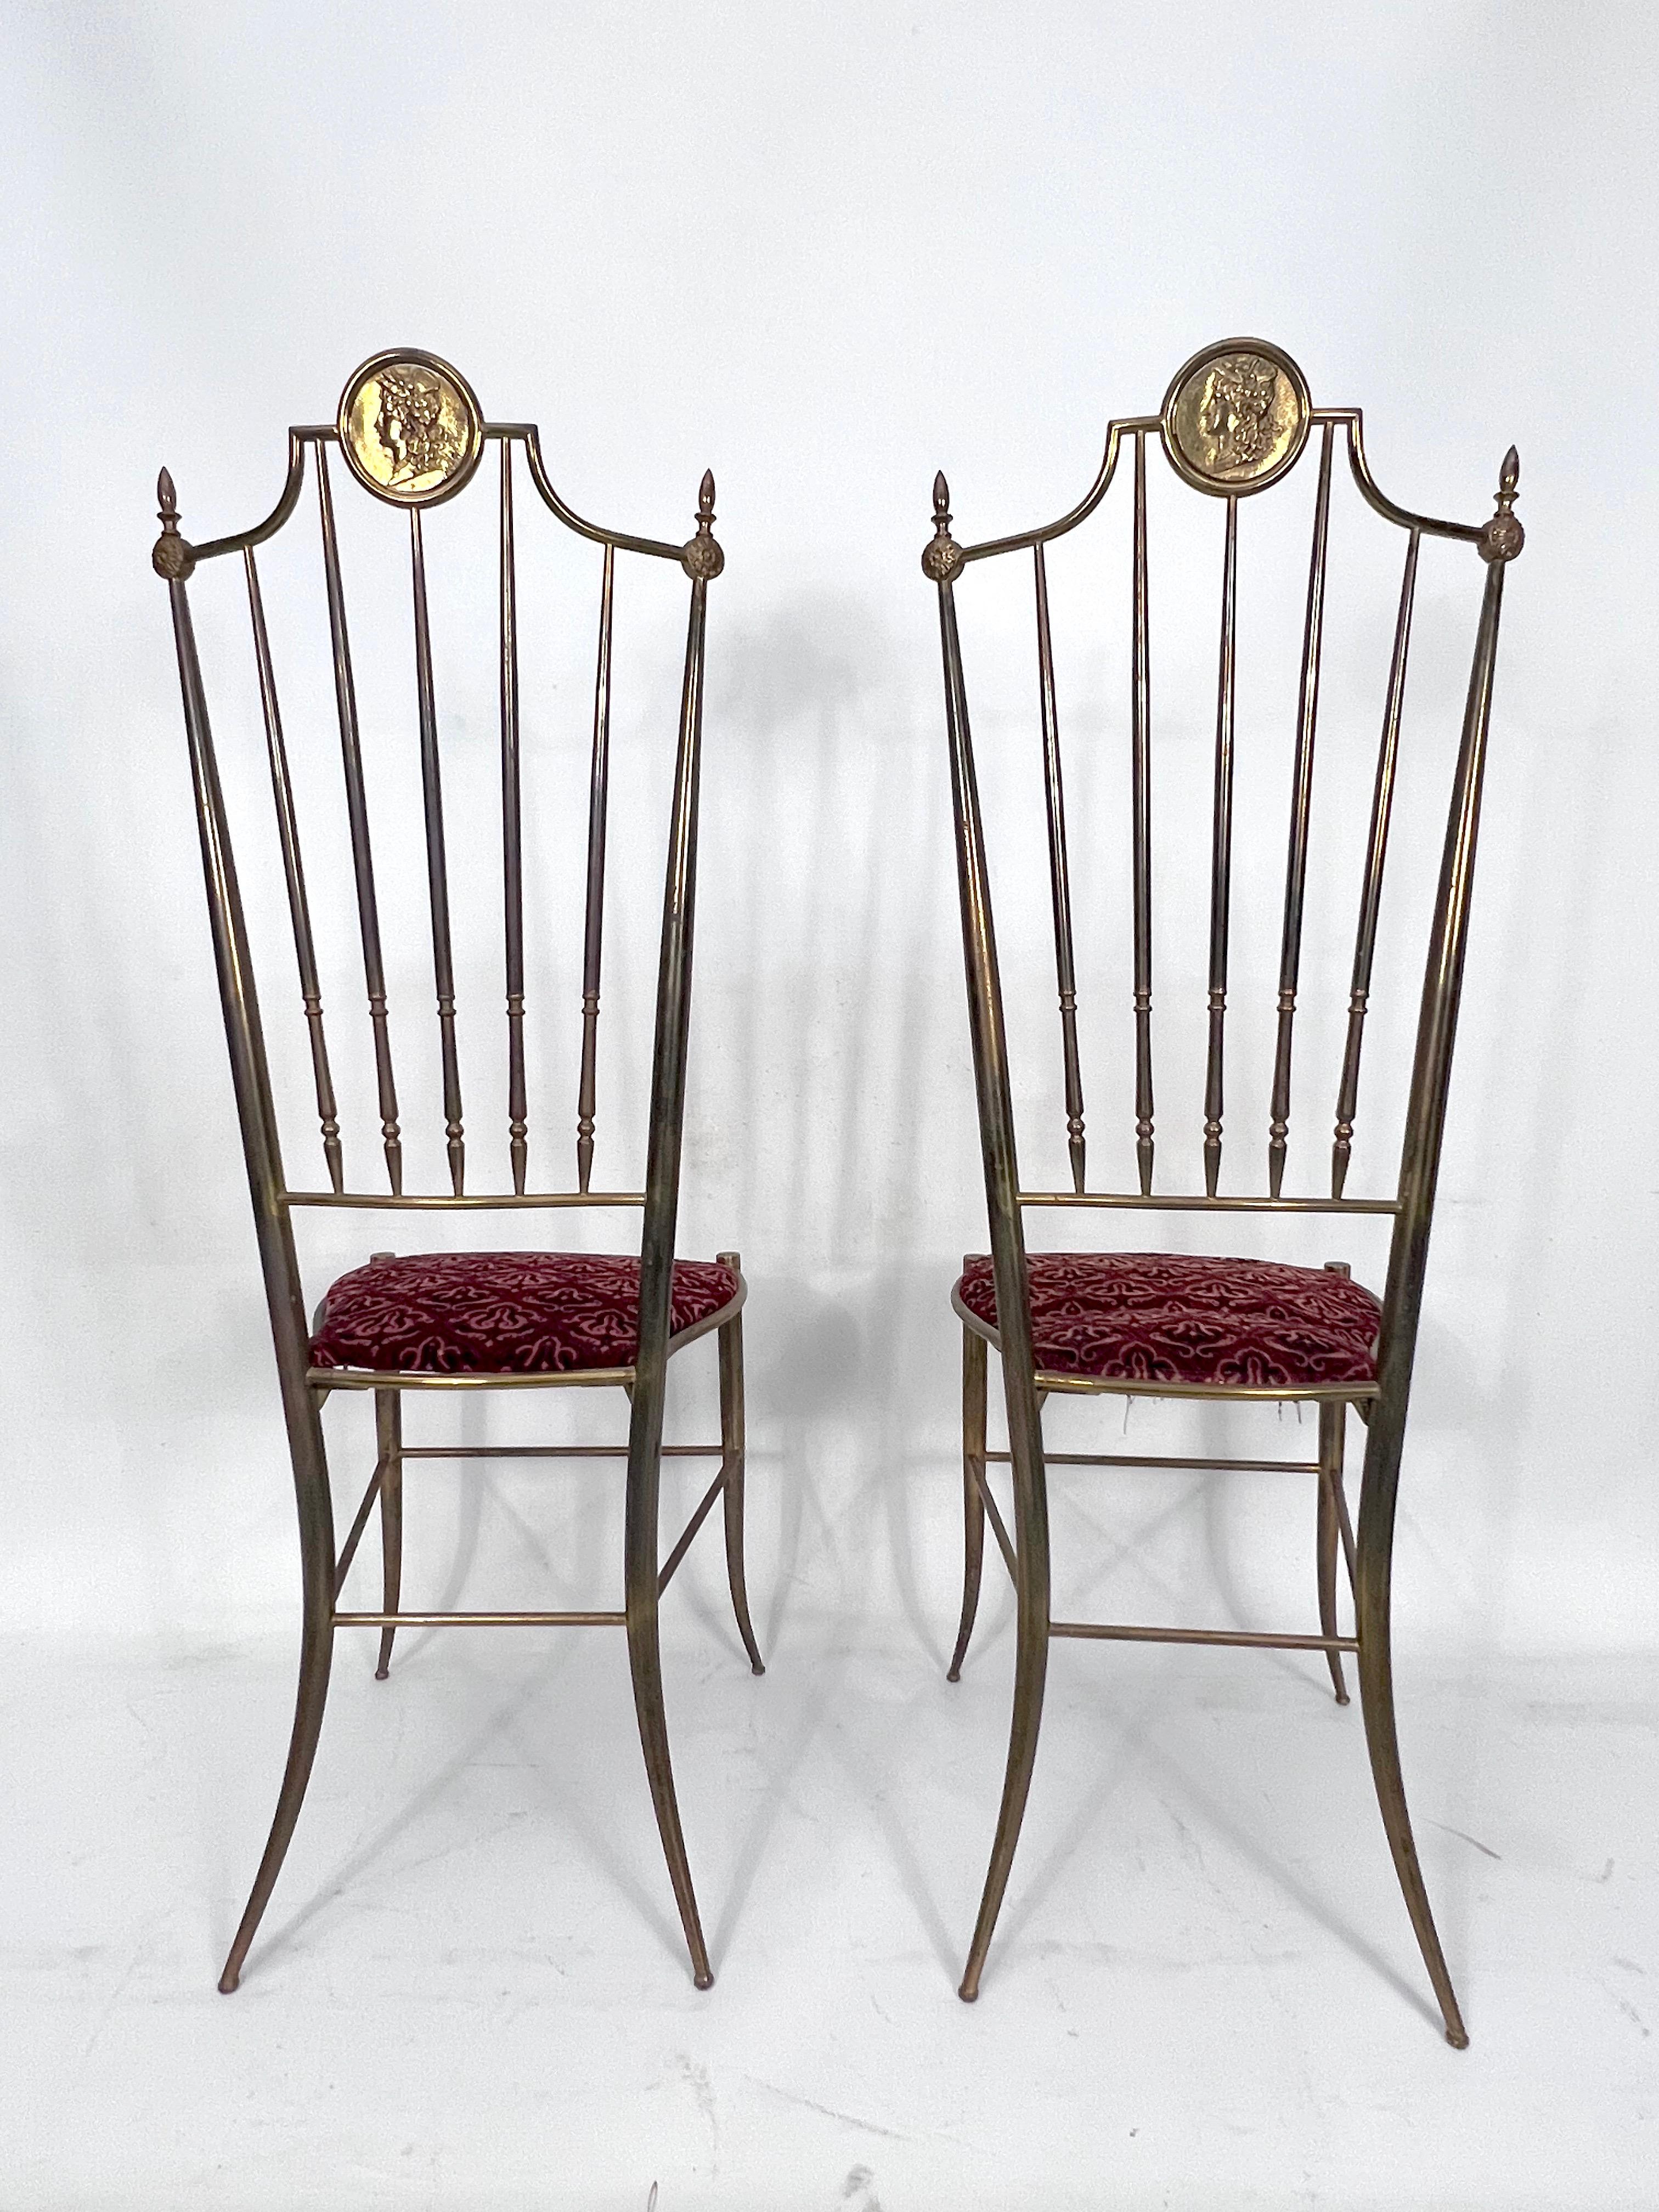 Vintage Pair of Brass Tall Chairs from Chiavari, Italy, 1950s For Sale 6